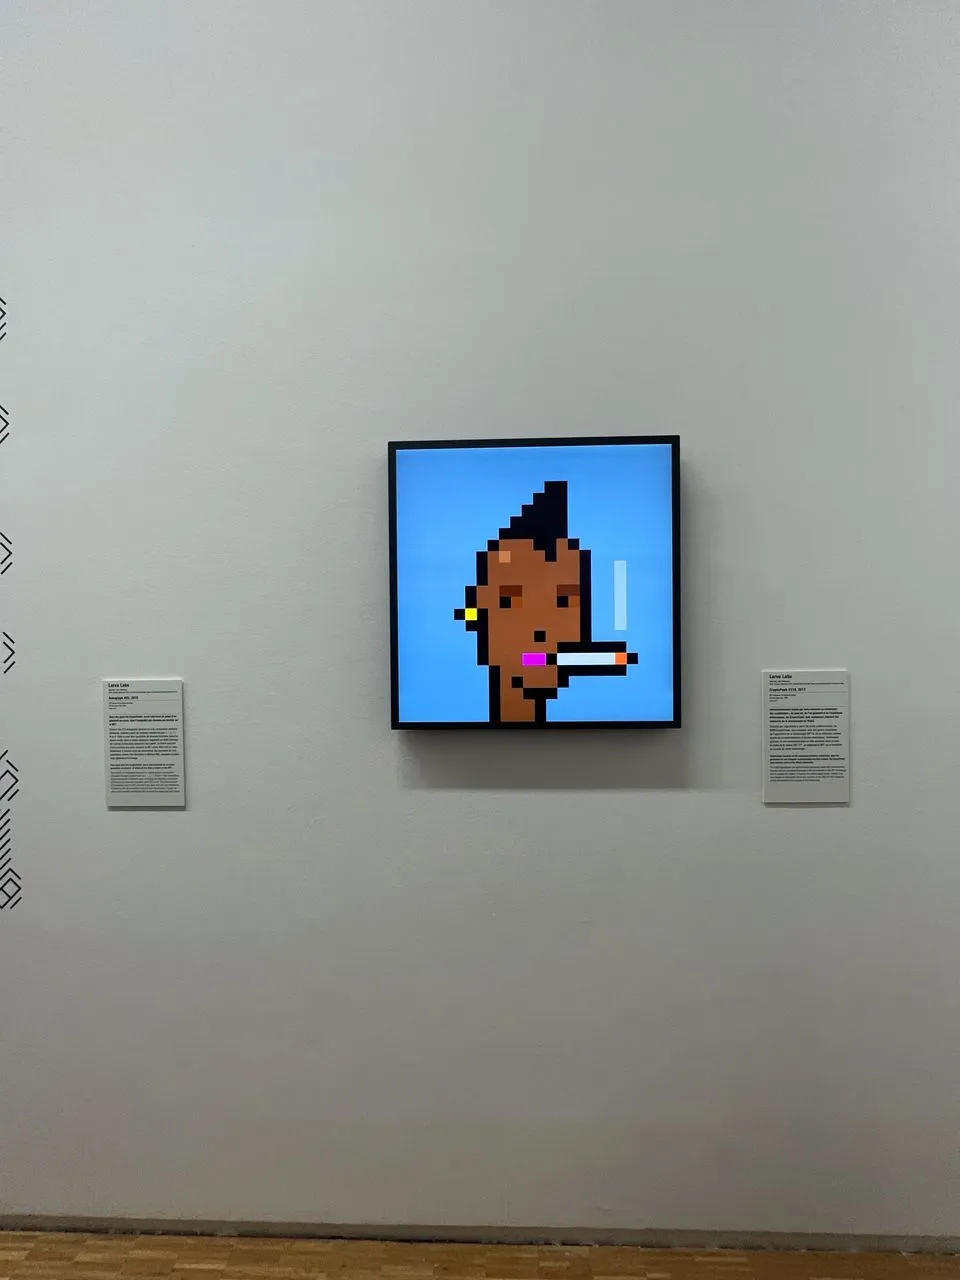 A piece of digital art hanging on a white wall.